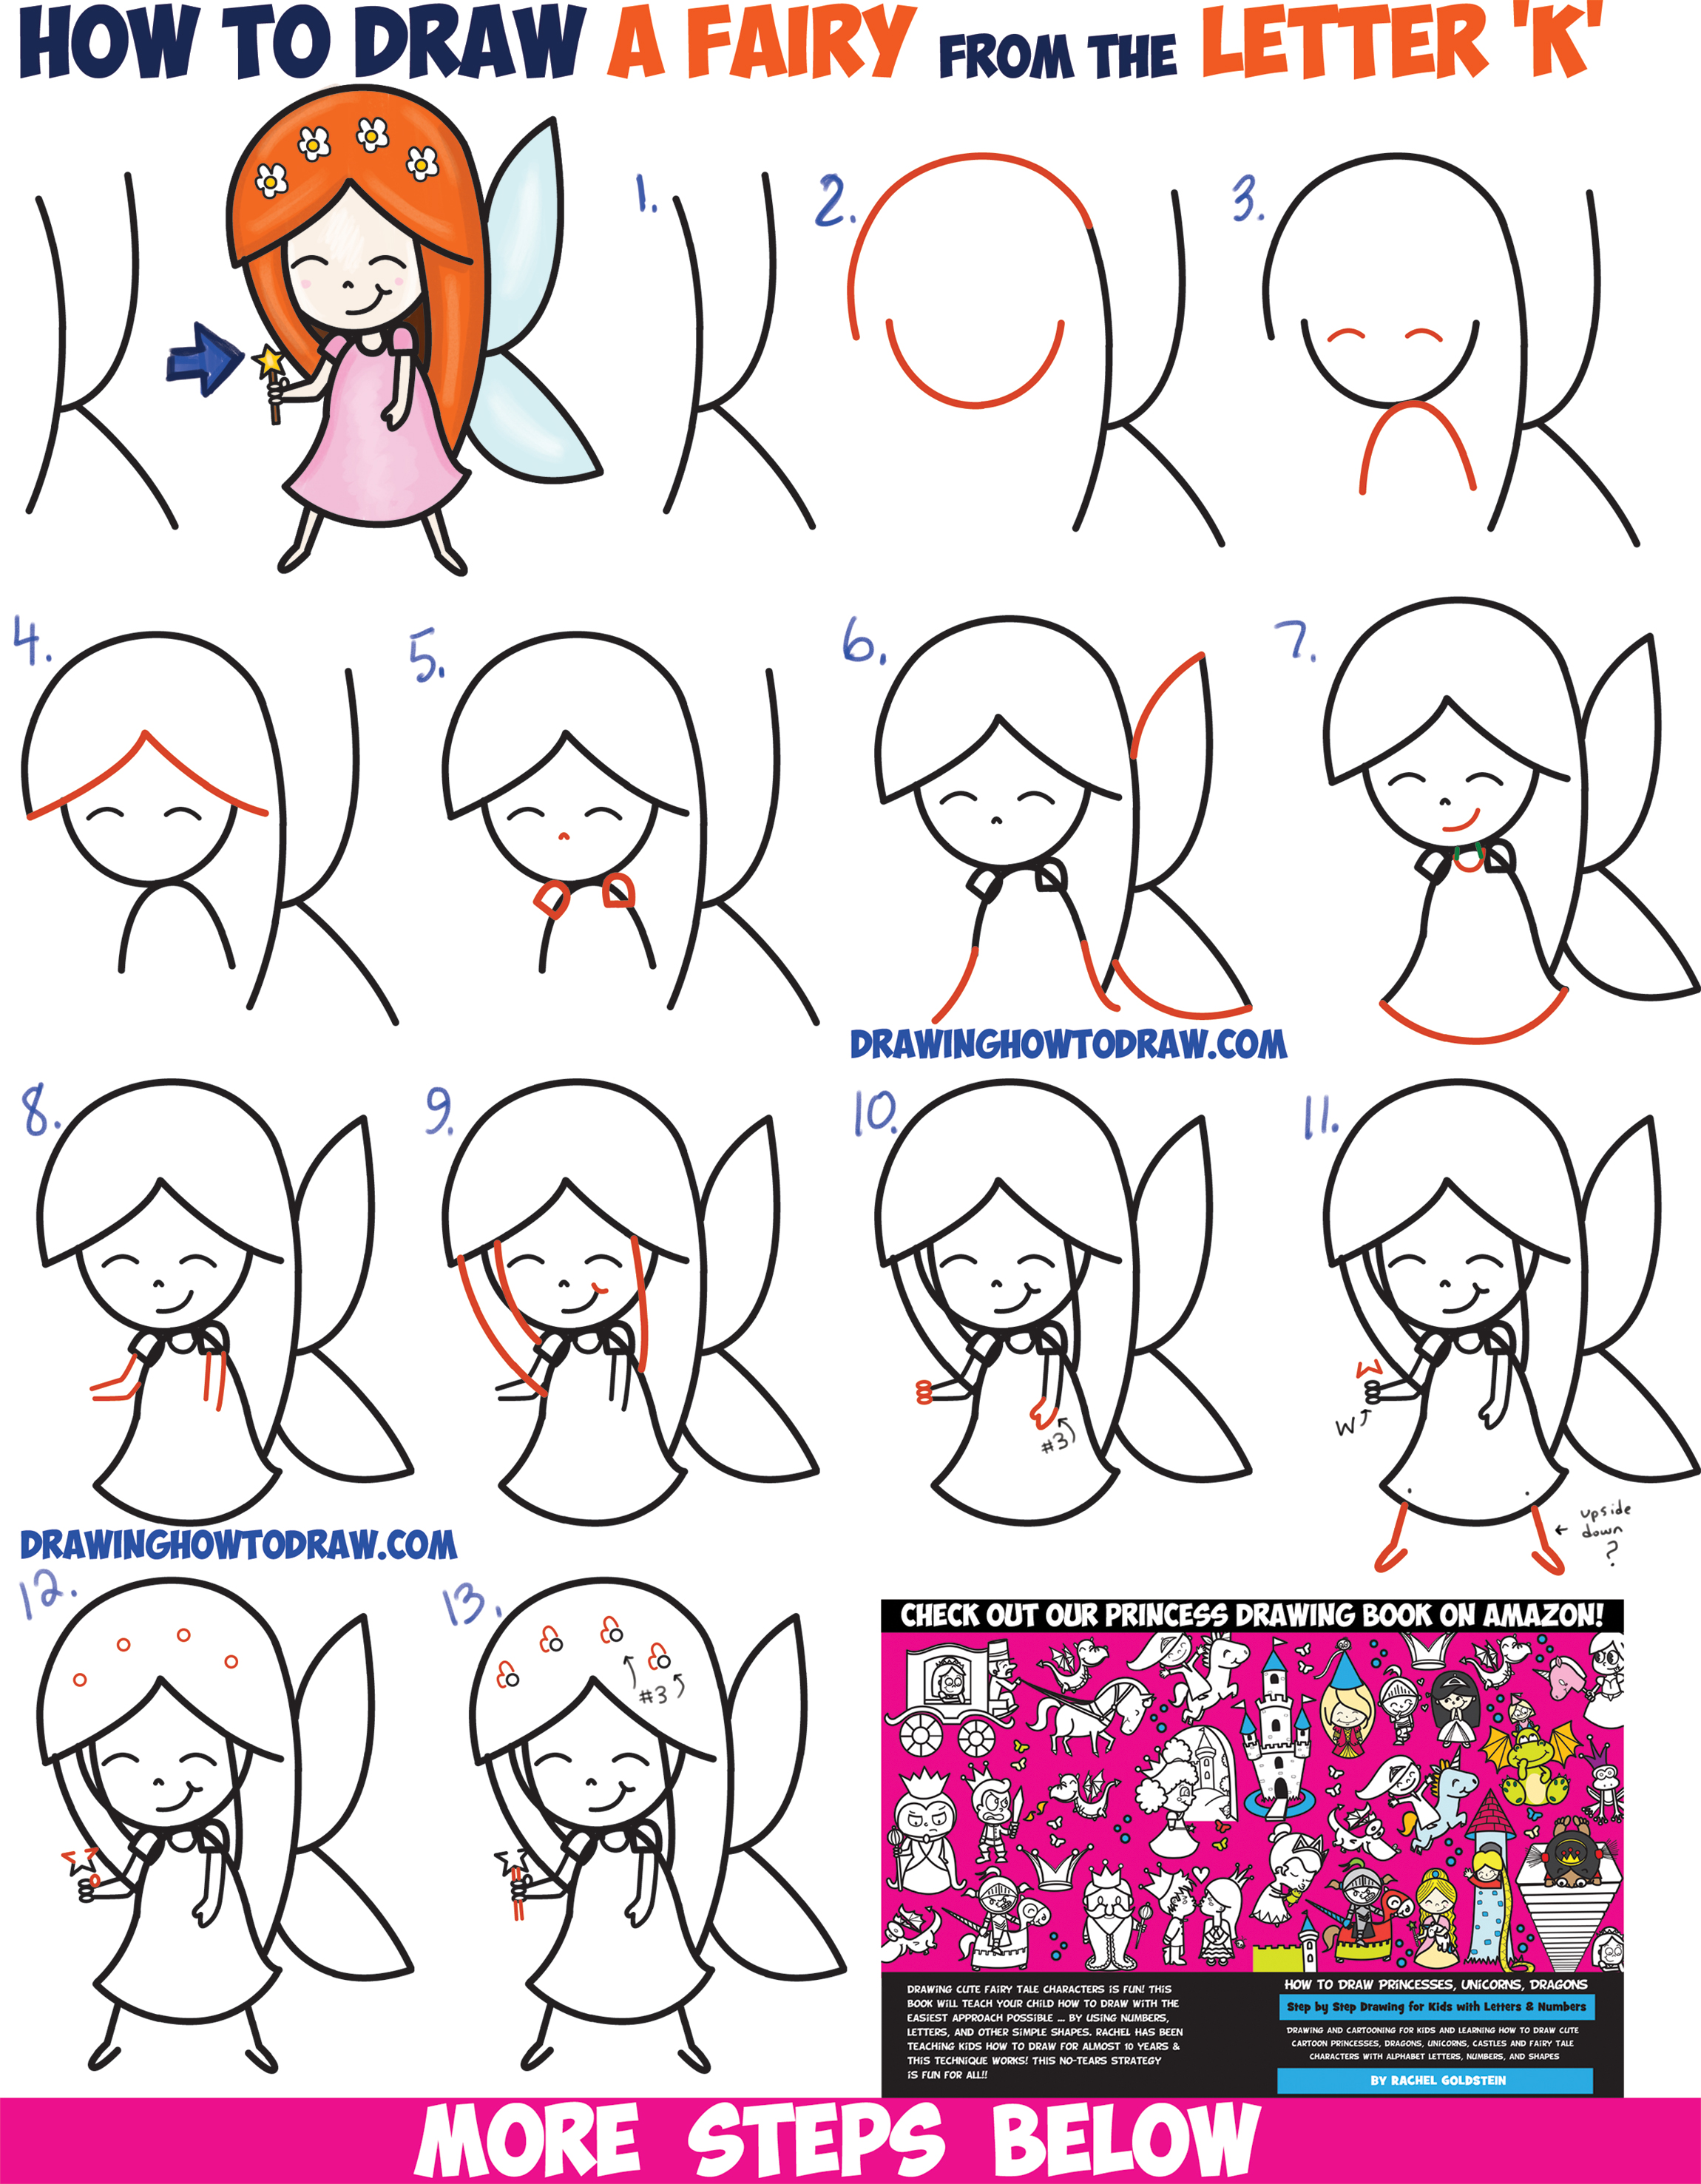 How To Draw A Cute Cartoon Fairy Kawaii Chibi From Letter K Easy Step By Step Drawing Tutorial For Kids How To Draw Step By Step Drawing Tutorials